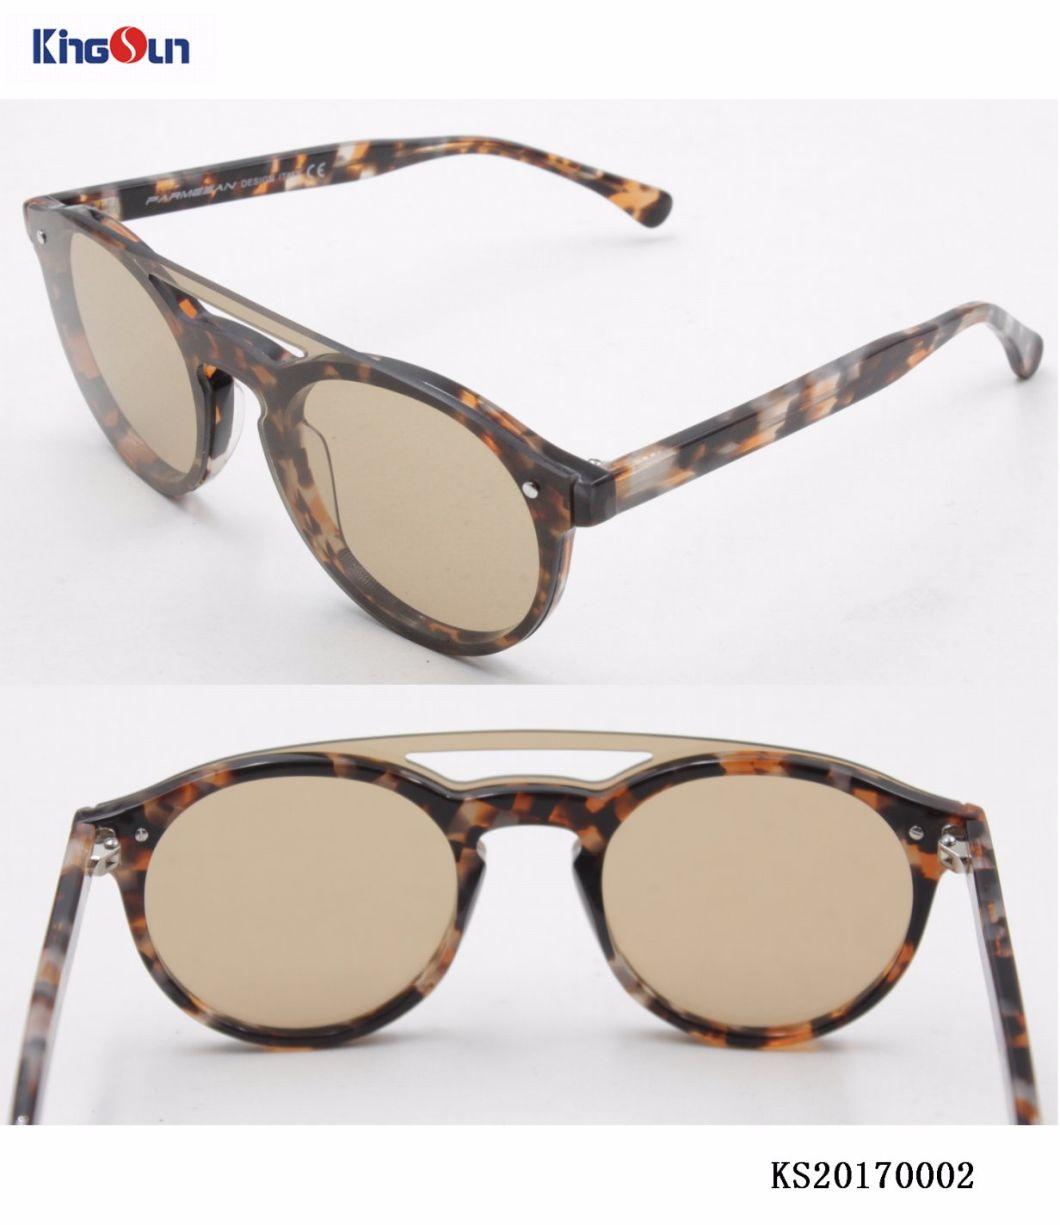 New Material Thin Acetate Sunglasses with One Piece PC Lens (KS000&⪞ apdot;)